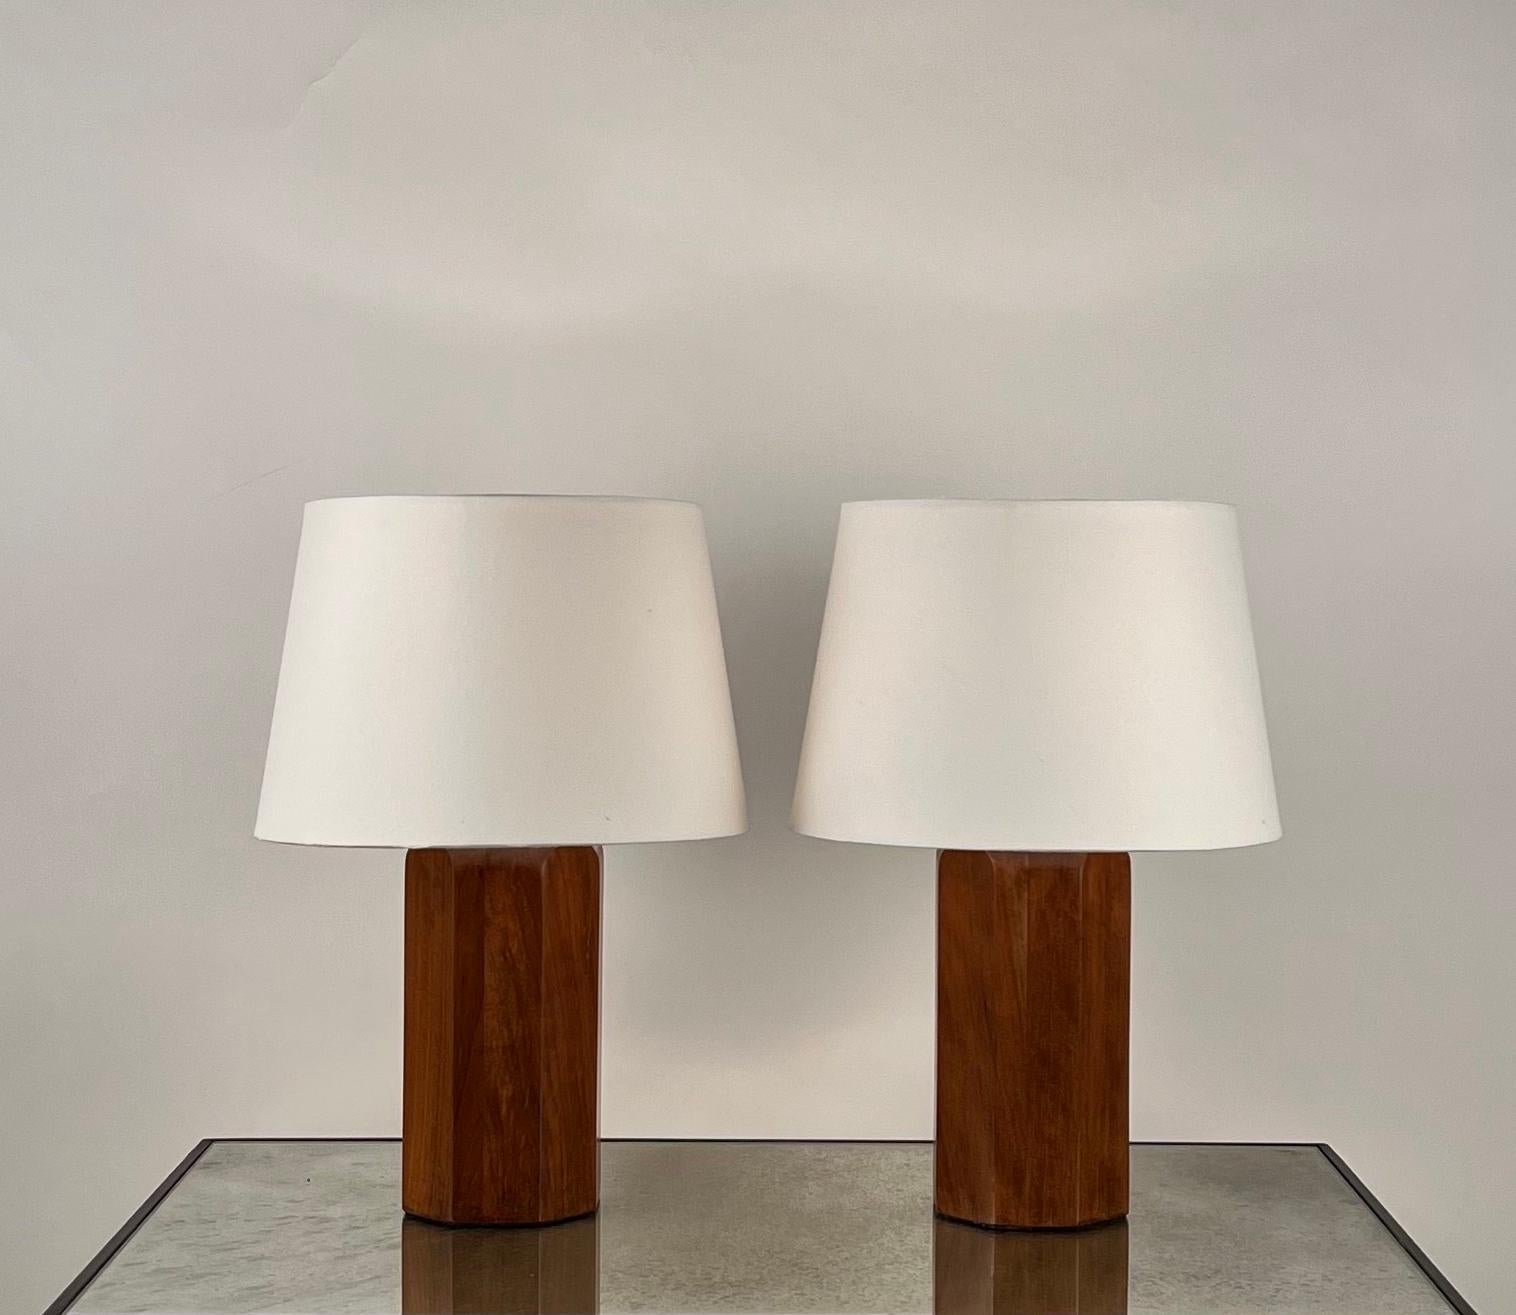 Pair of 'Octogone' walnut table lamps with parchment shades by DESIGN FRÈRES®.

An attractive, understated combination of polished walnut geometric bases and European style parchment shades (no harps or finials).

Dimensions listed are with the